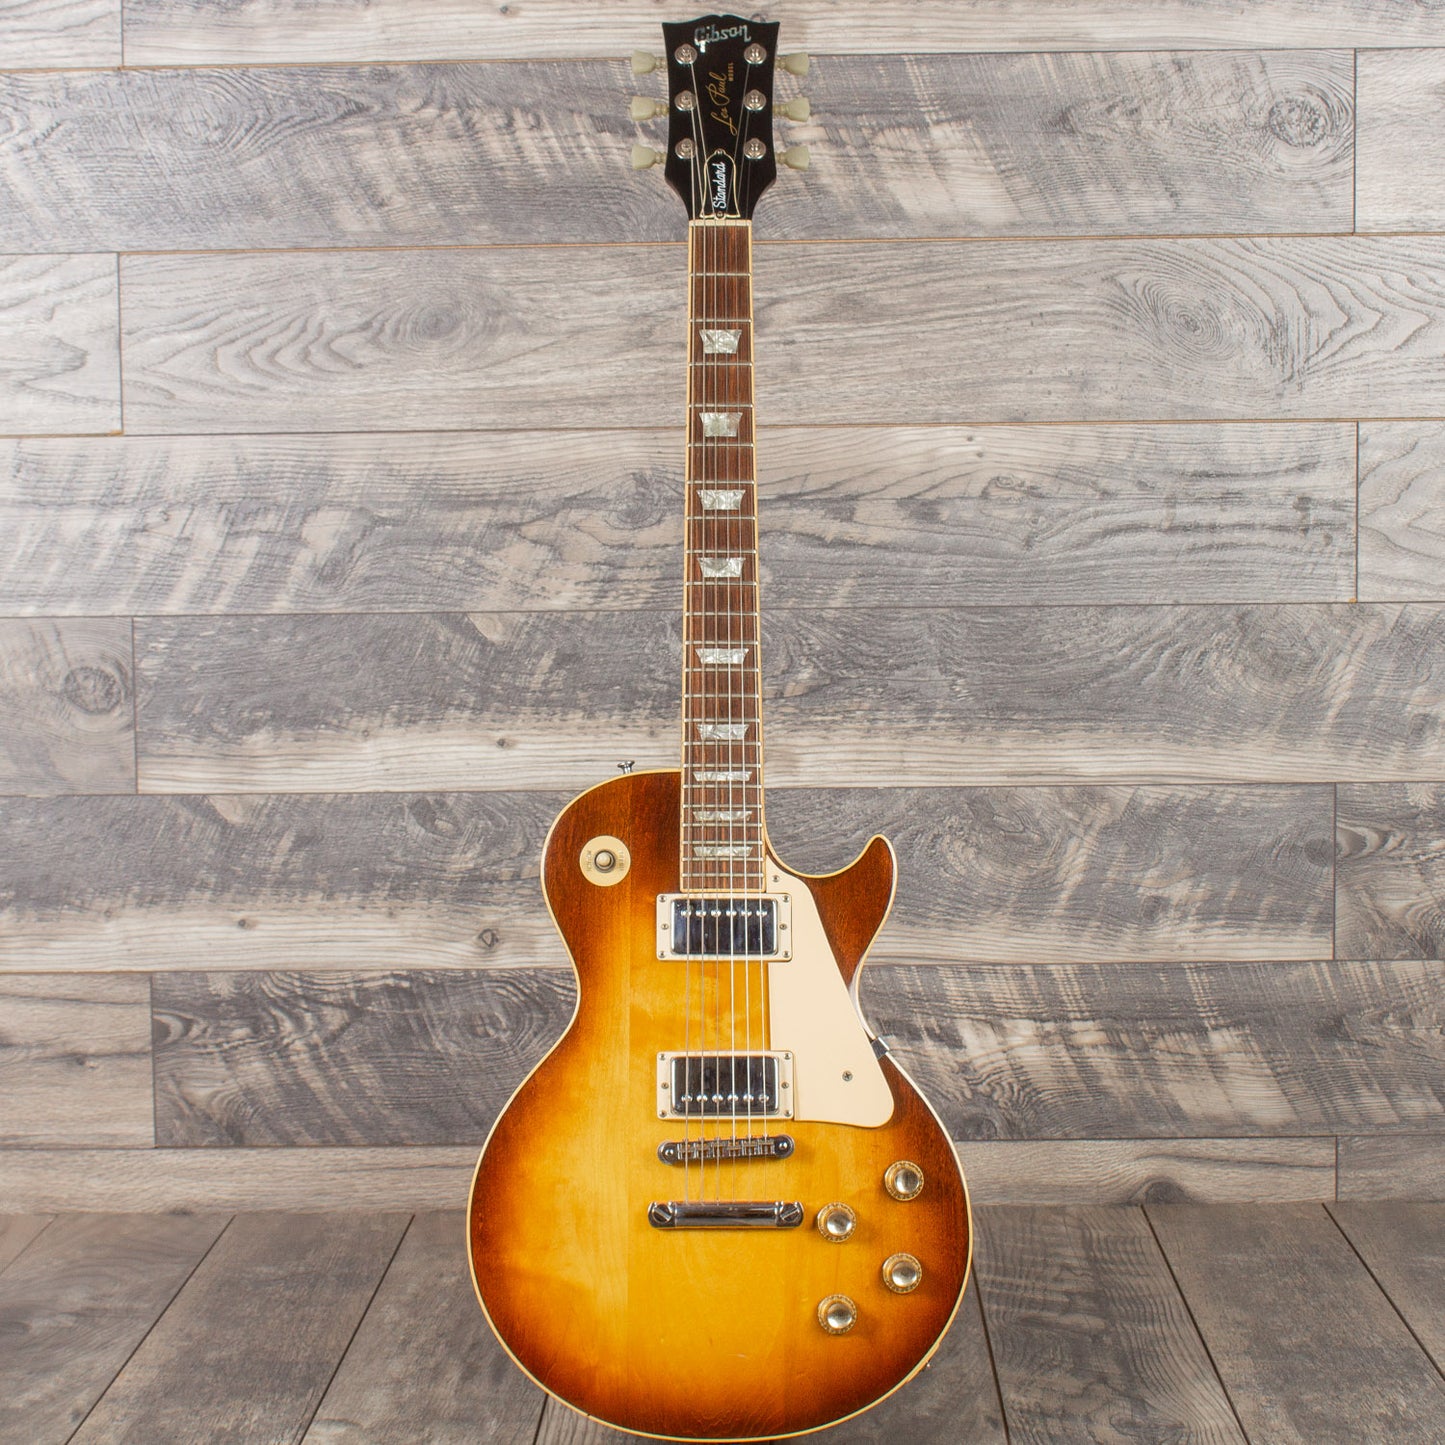 1975 Gibson Les Paul Deluxe